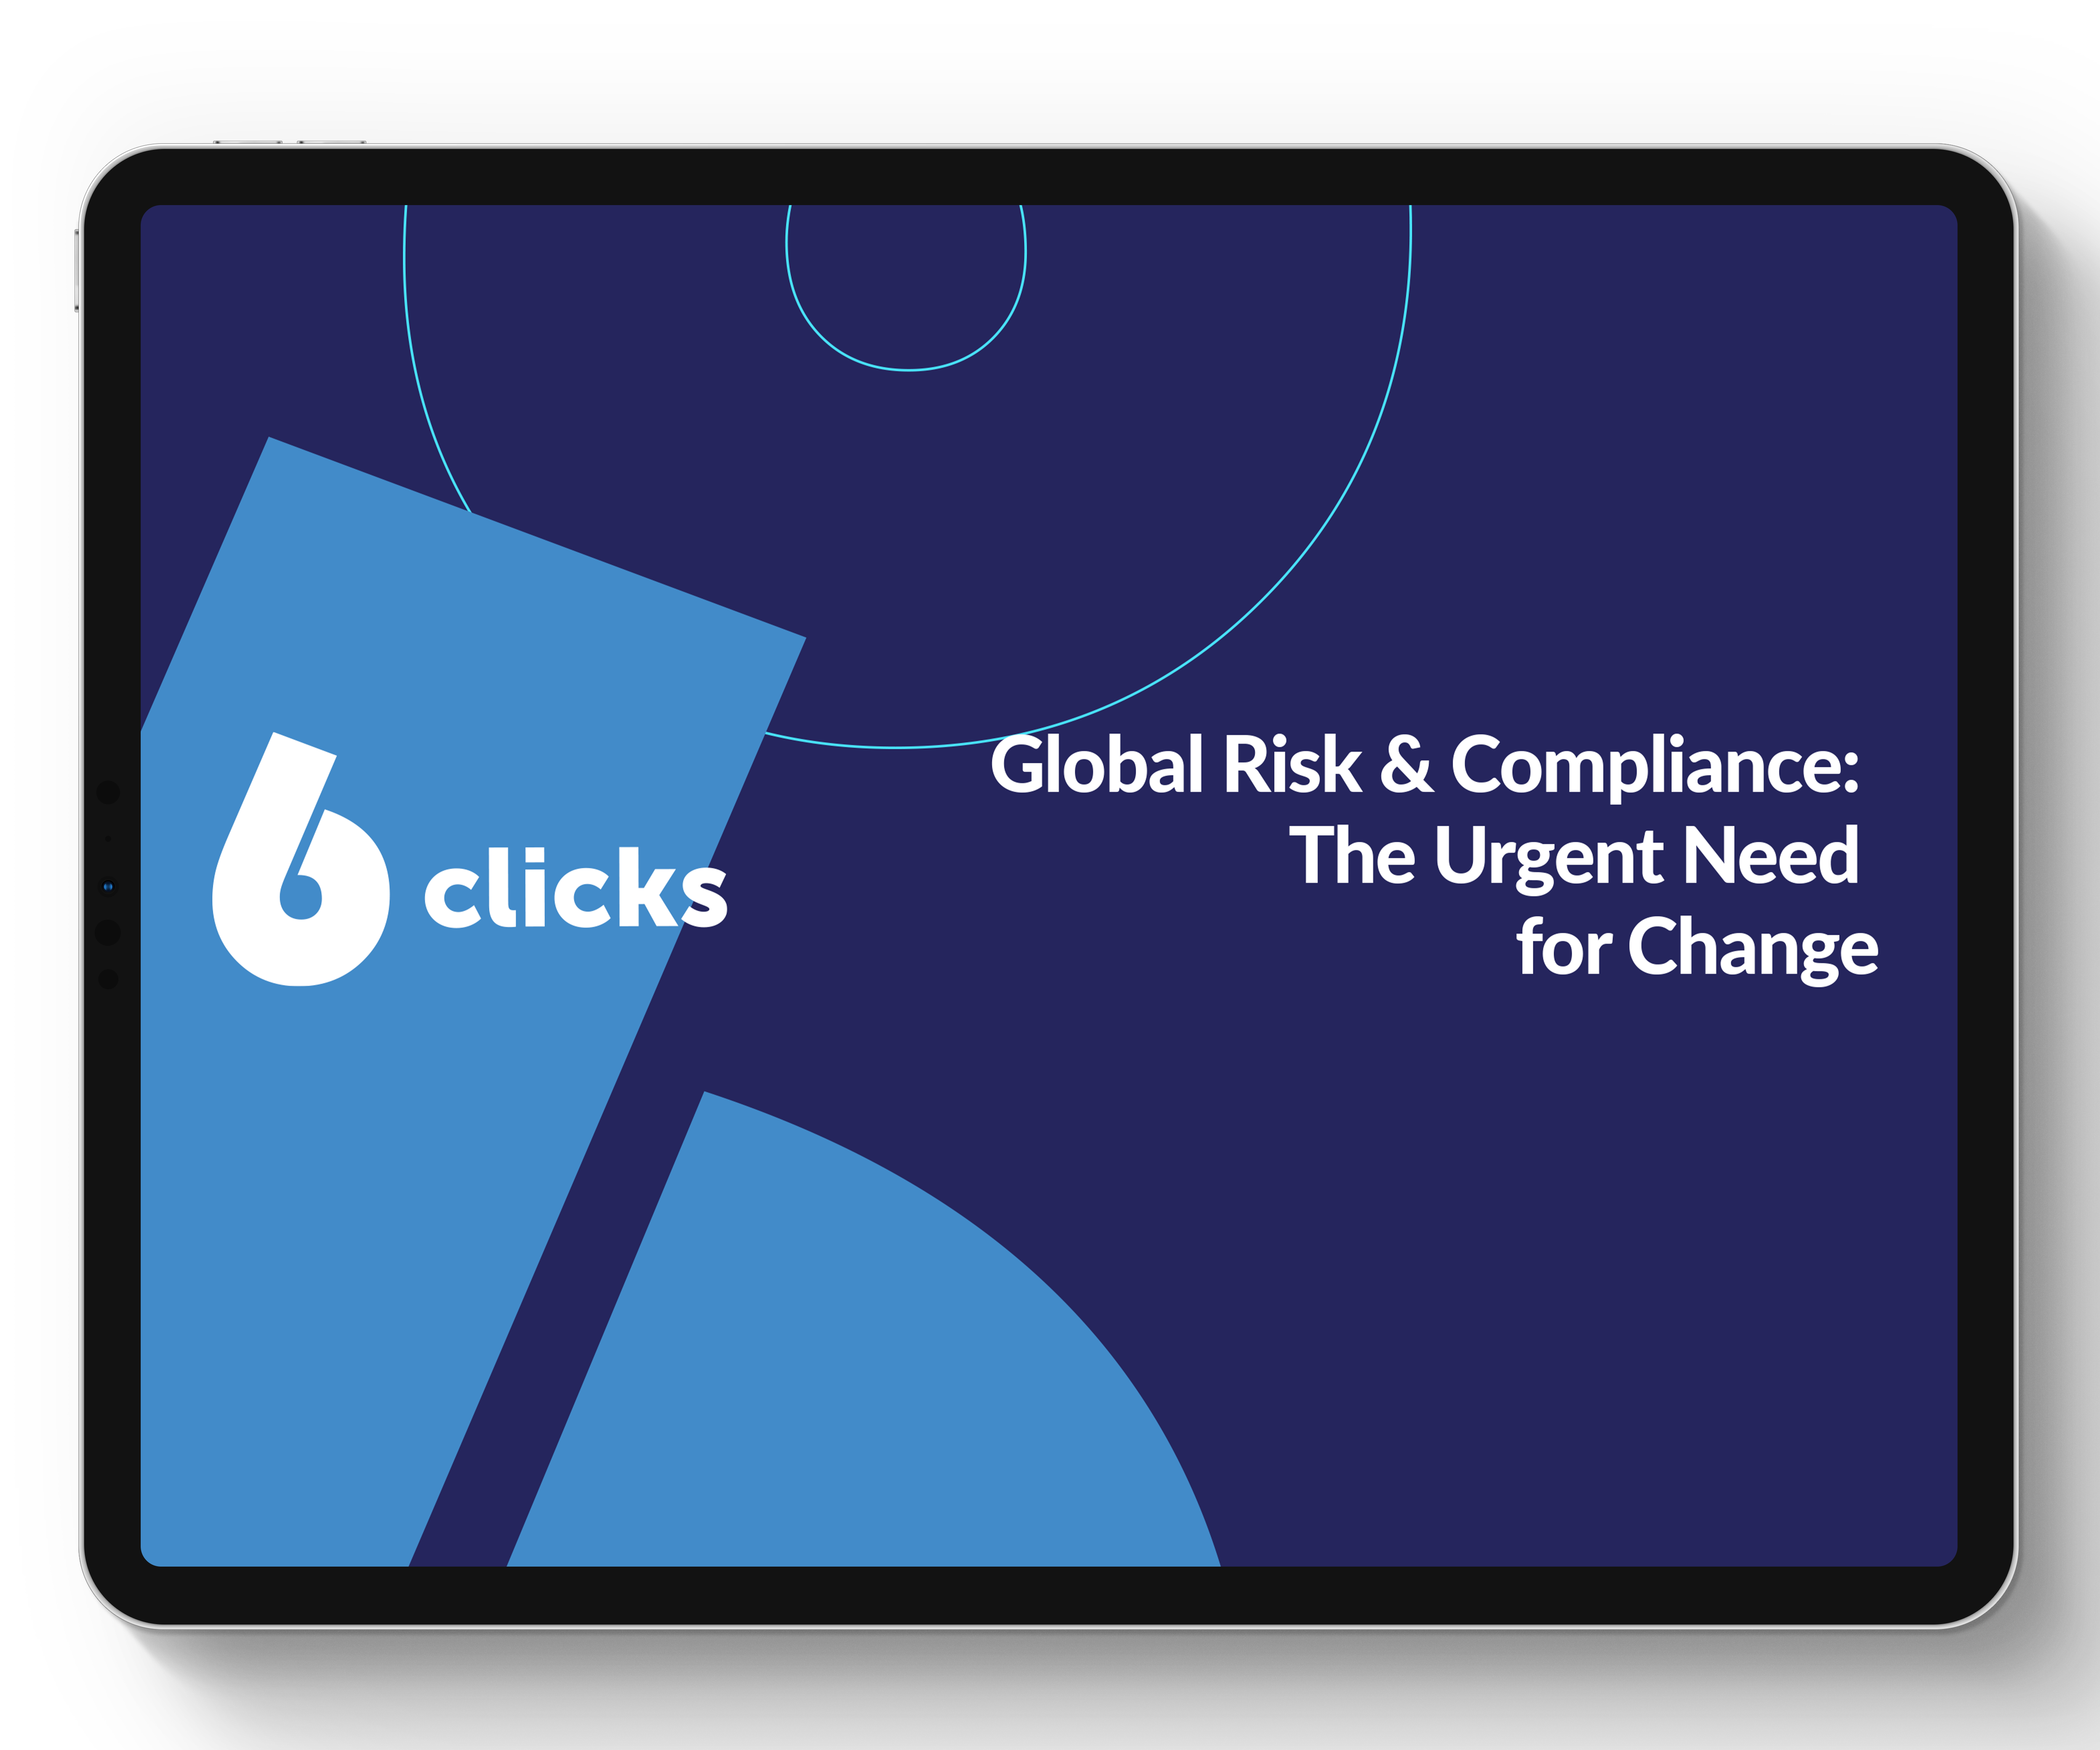 Global Risk & Compliance The Urgent Need for Change